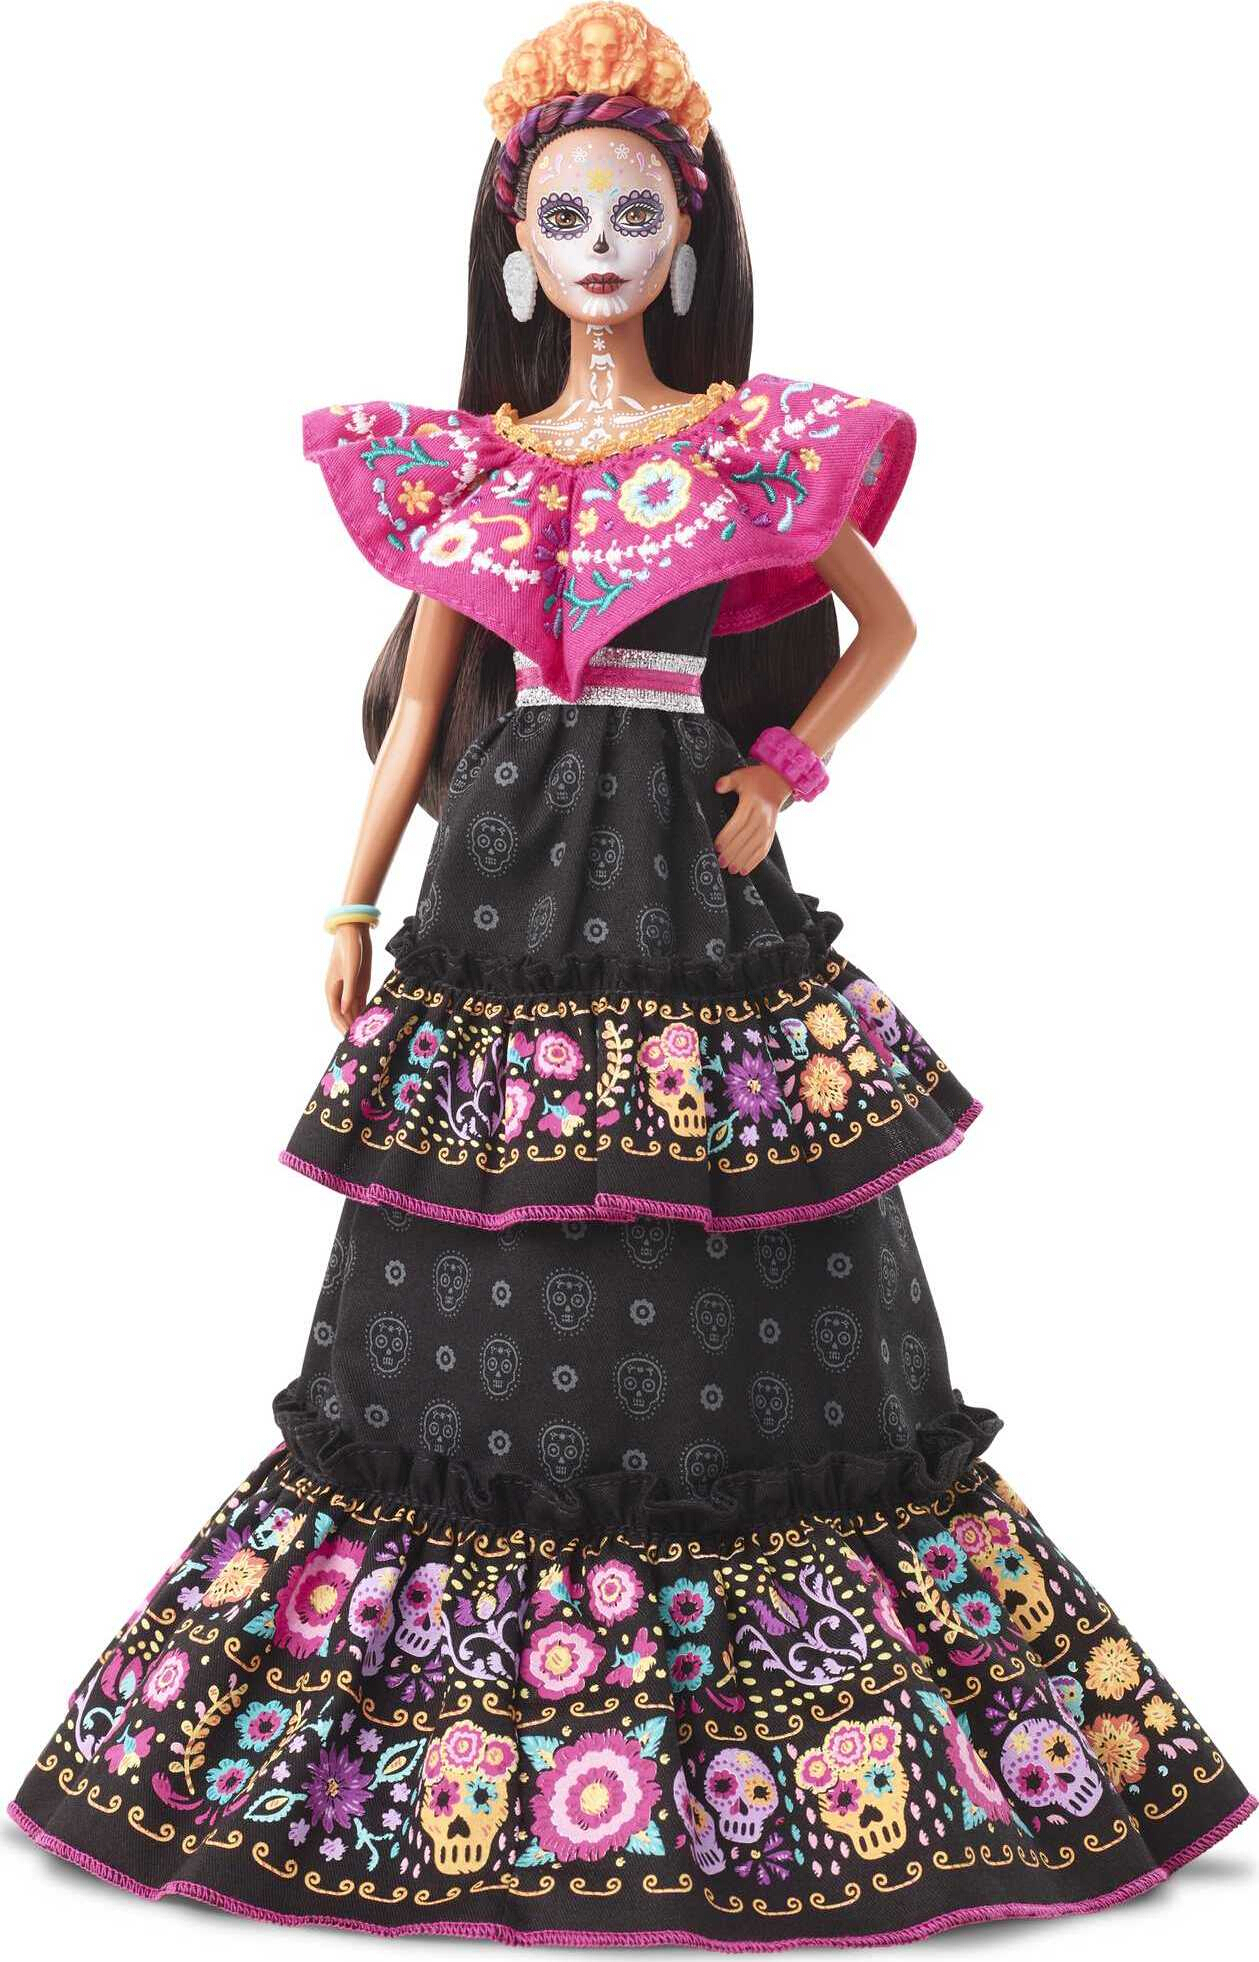 Barbie Signature 2022 Dia de Muertos Collectible Doll in Embroidered Dress & Flower Crown - image 1 of 7